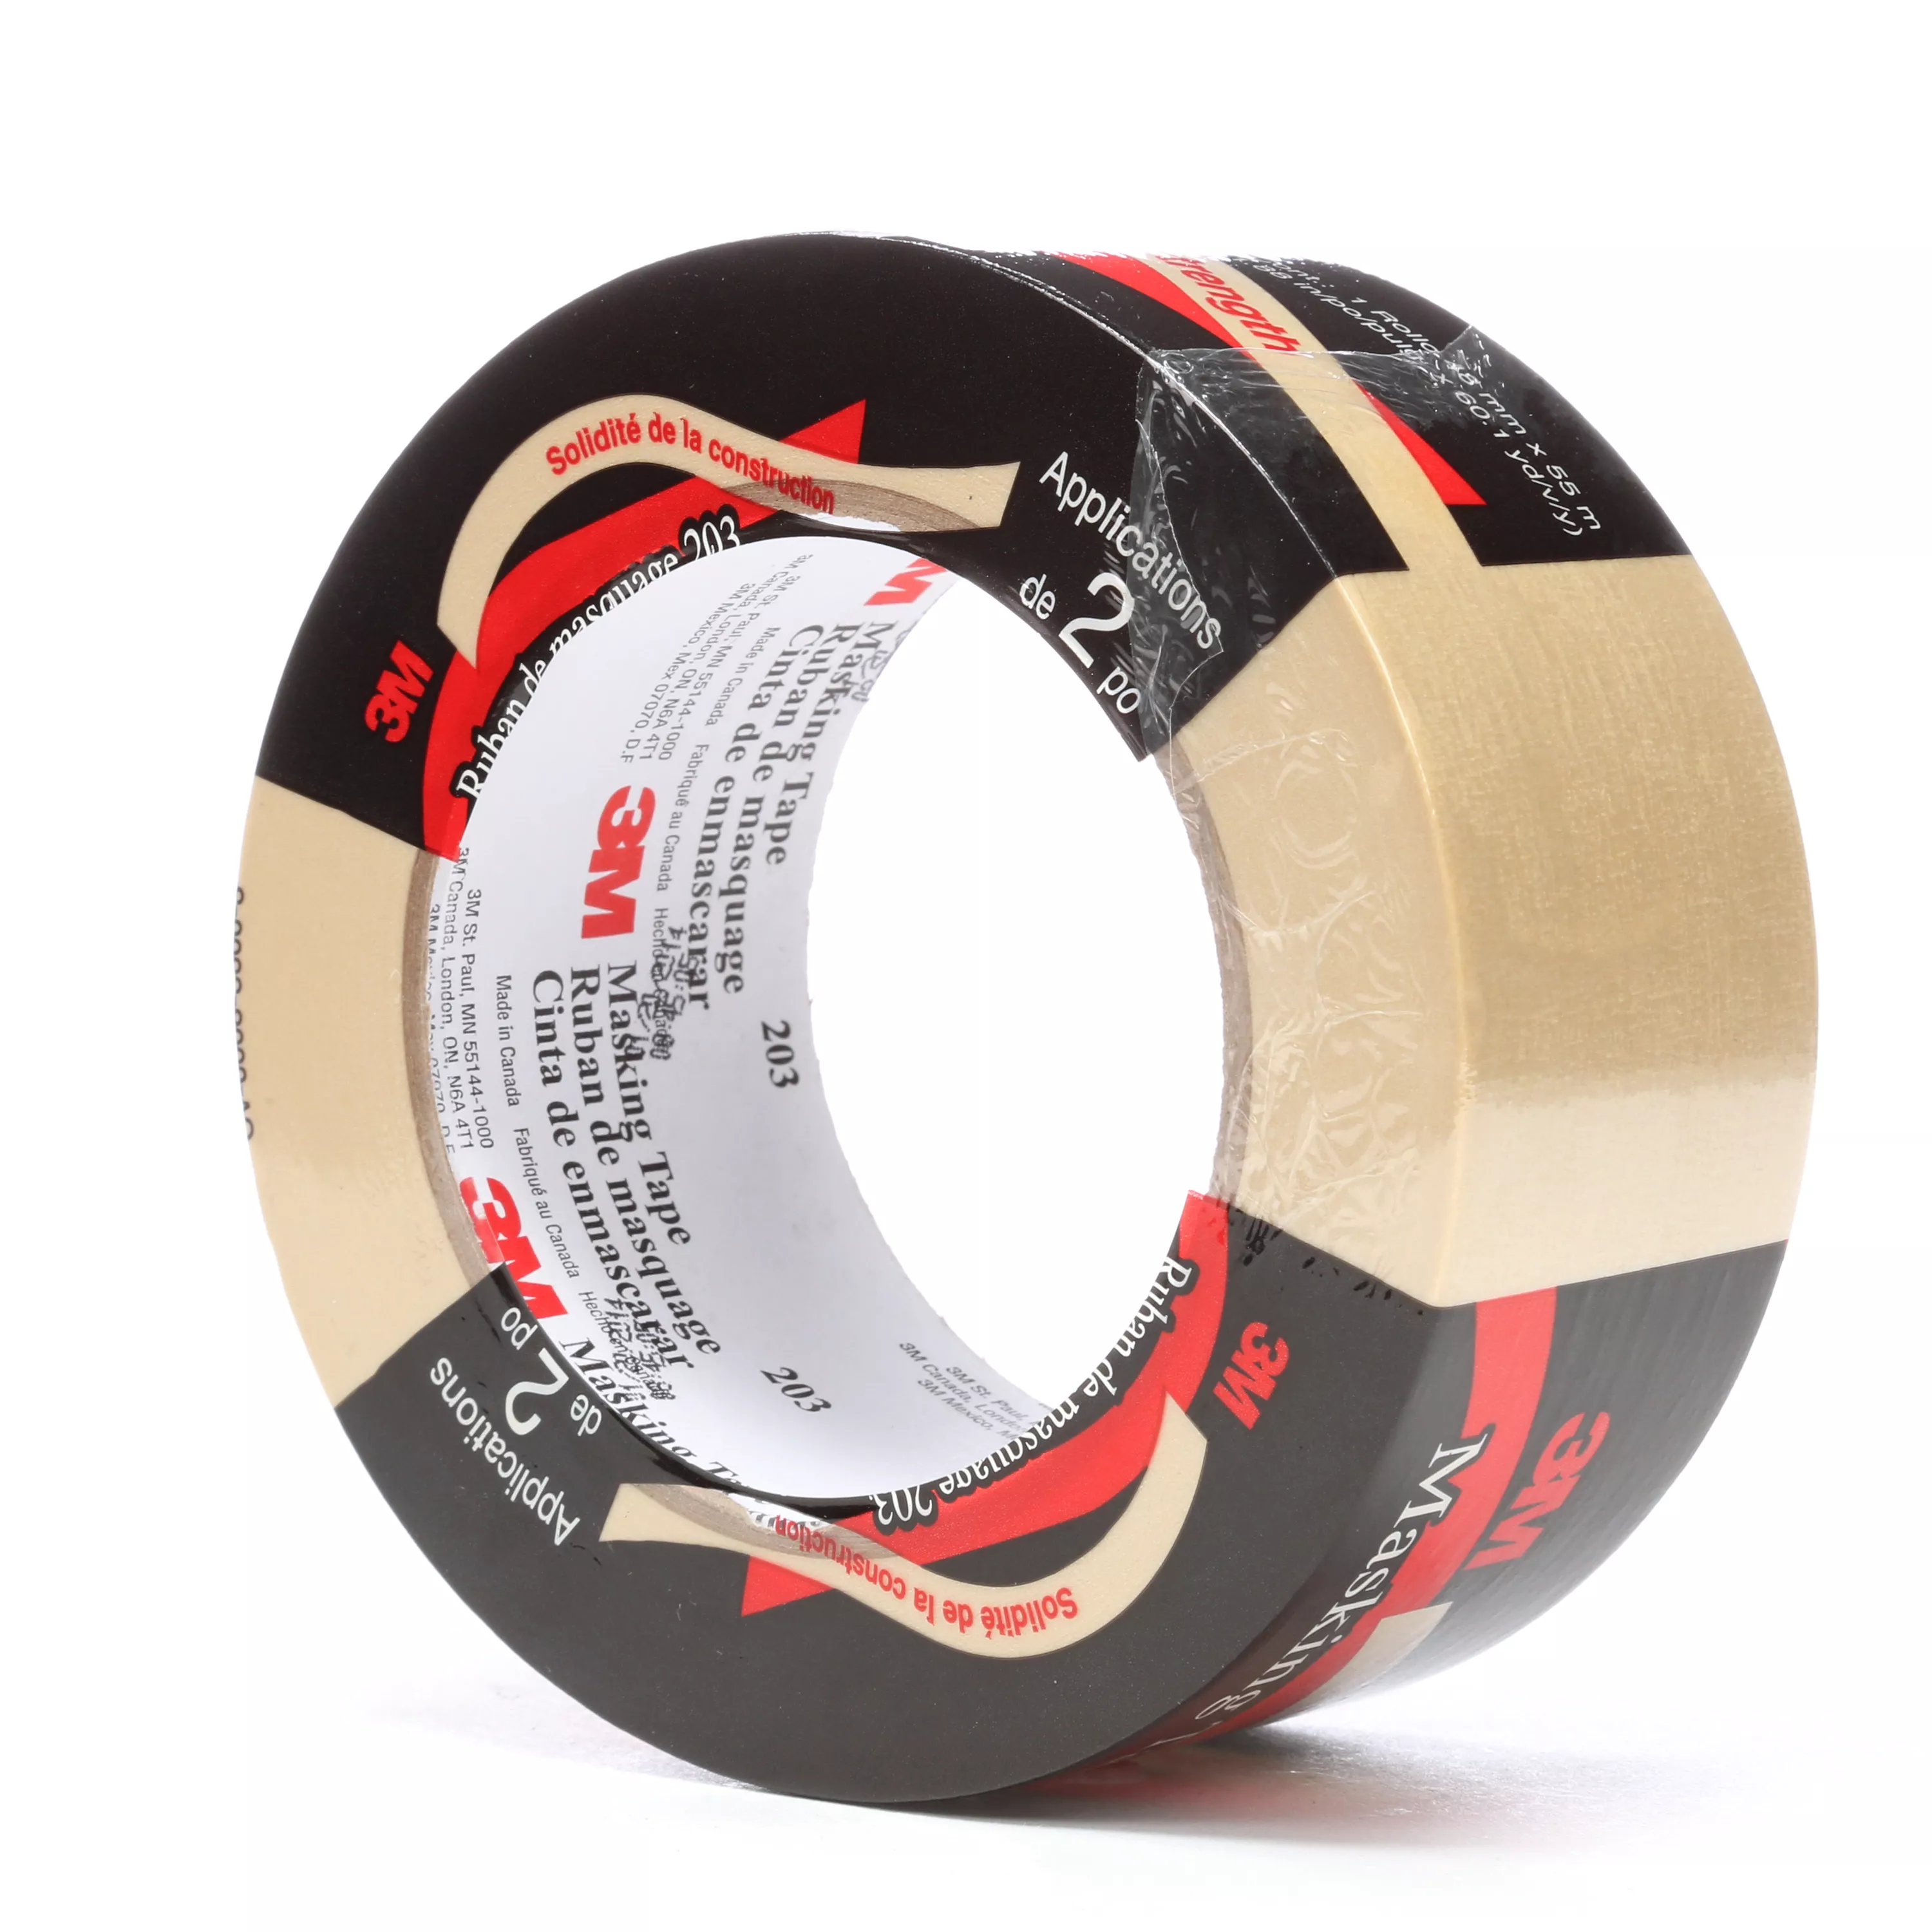 3M™ General Purpose Masking Tape 203, Beige, 48 mm x 55 m, 4.7 mil, 24
Roll/Case, Individually Wrapped Conveniently Packaged